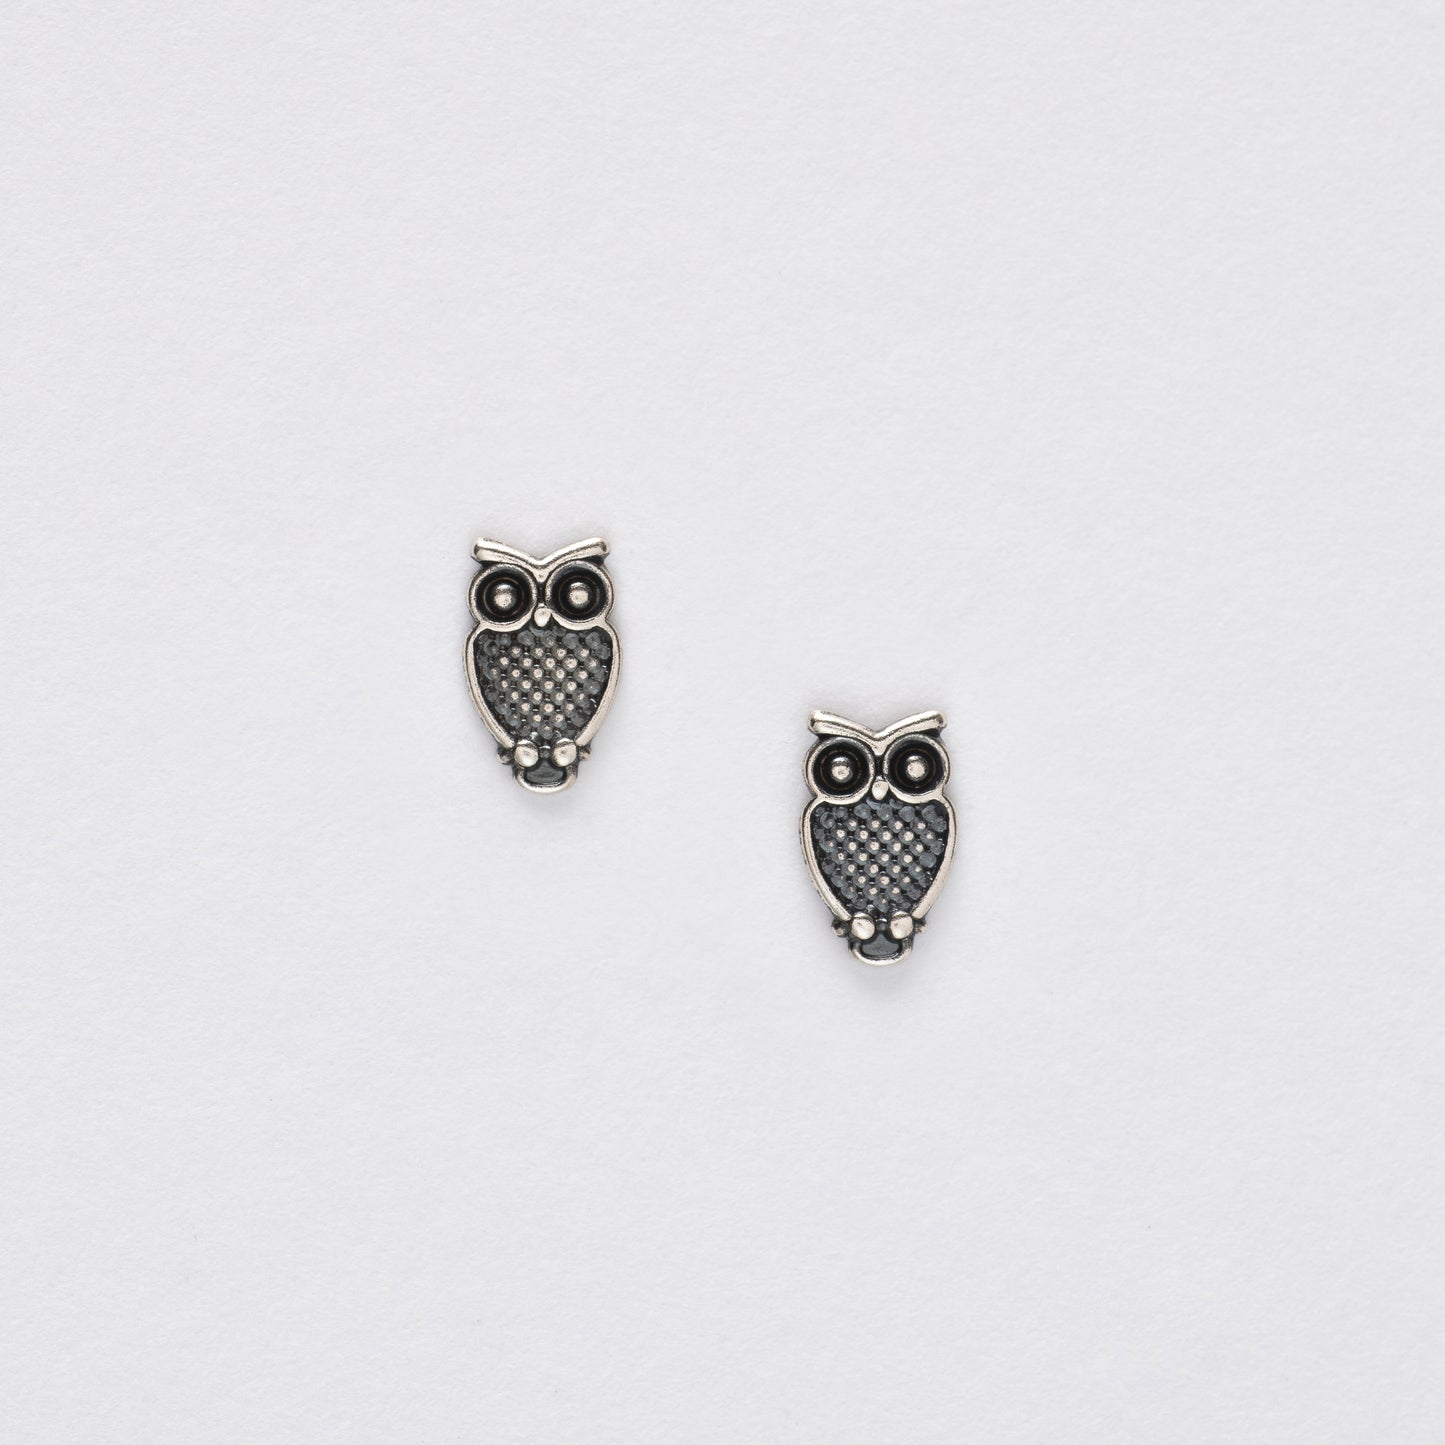 Owl Silver Ear Stud Earrings Crumble and Core   